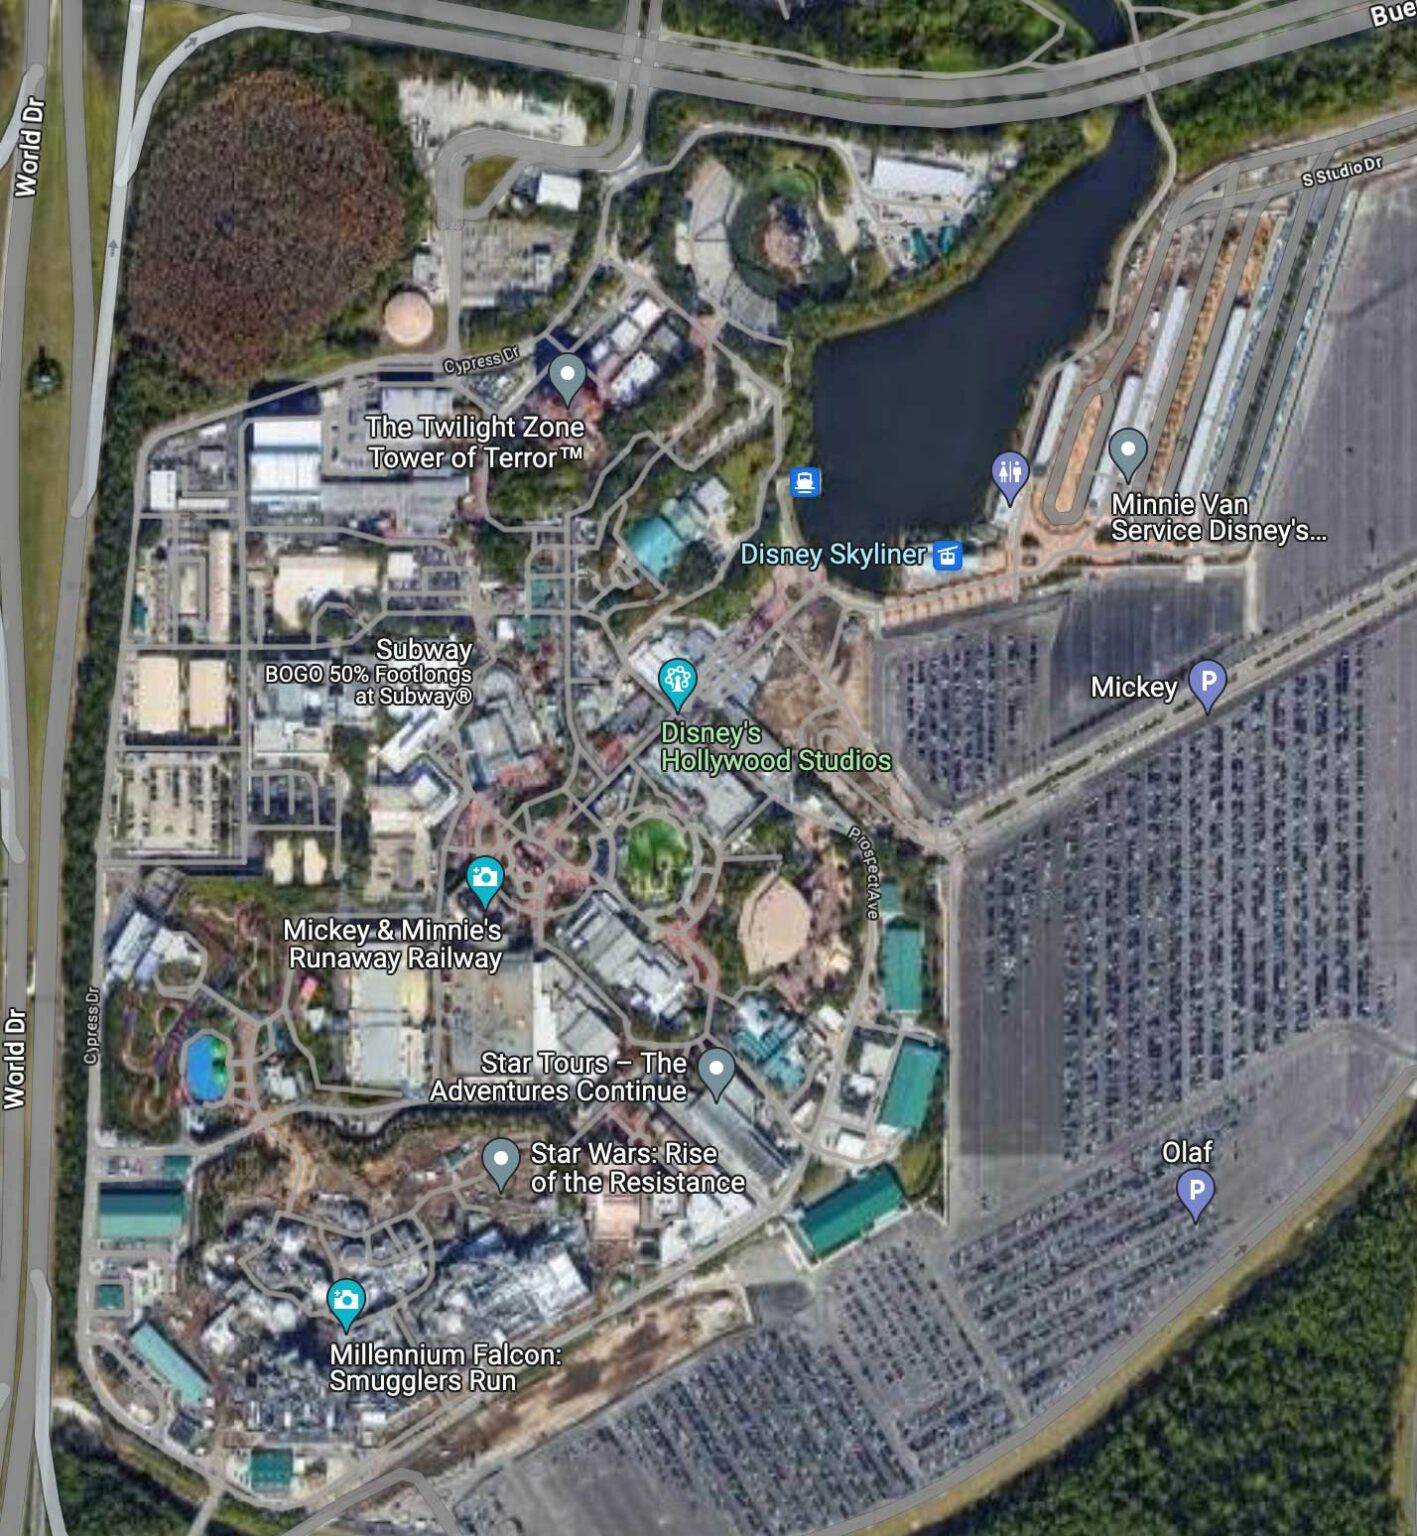 Overview & Layout of Disney's Hollywood Studios